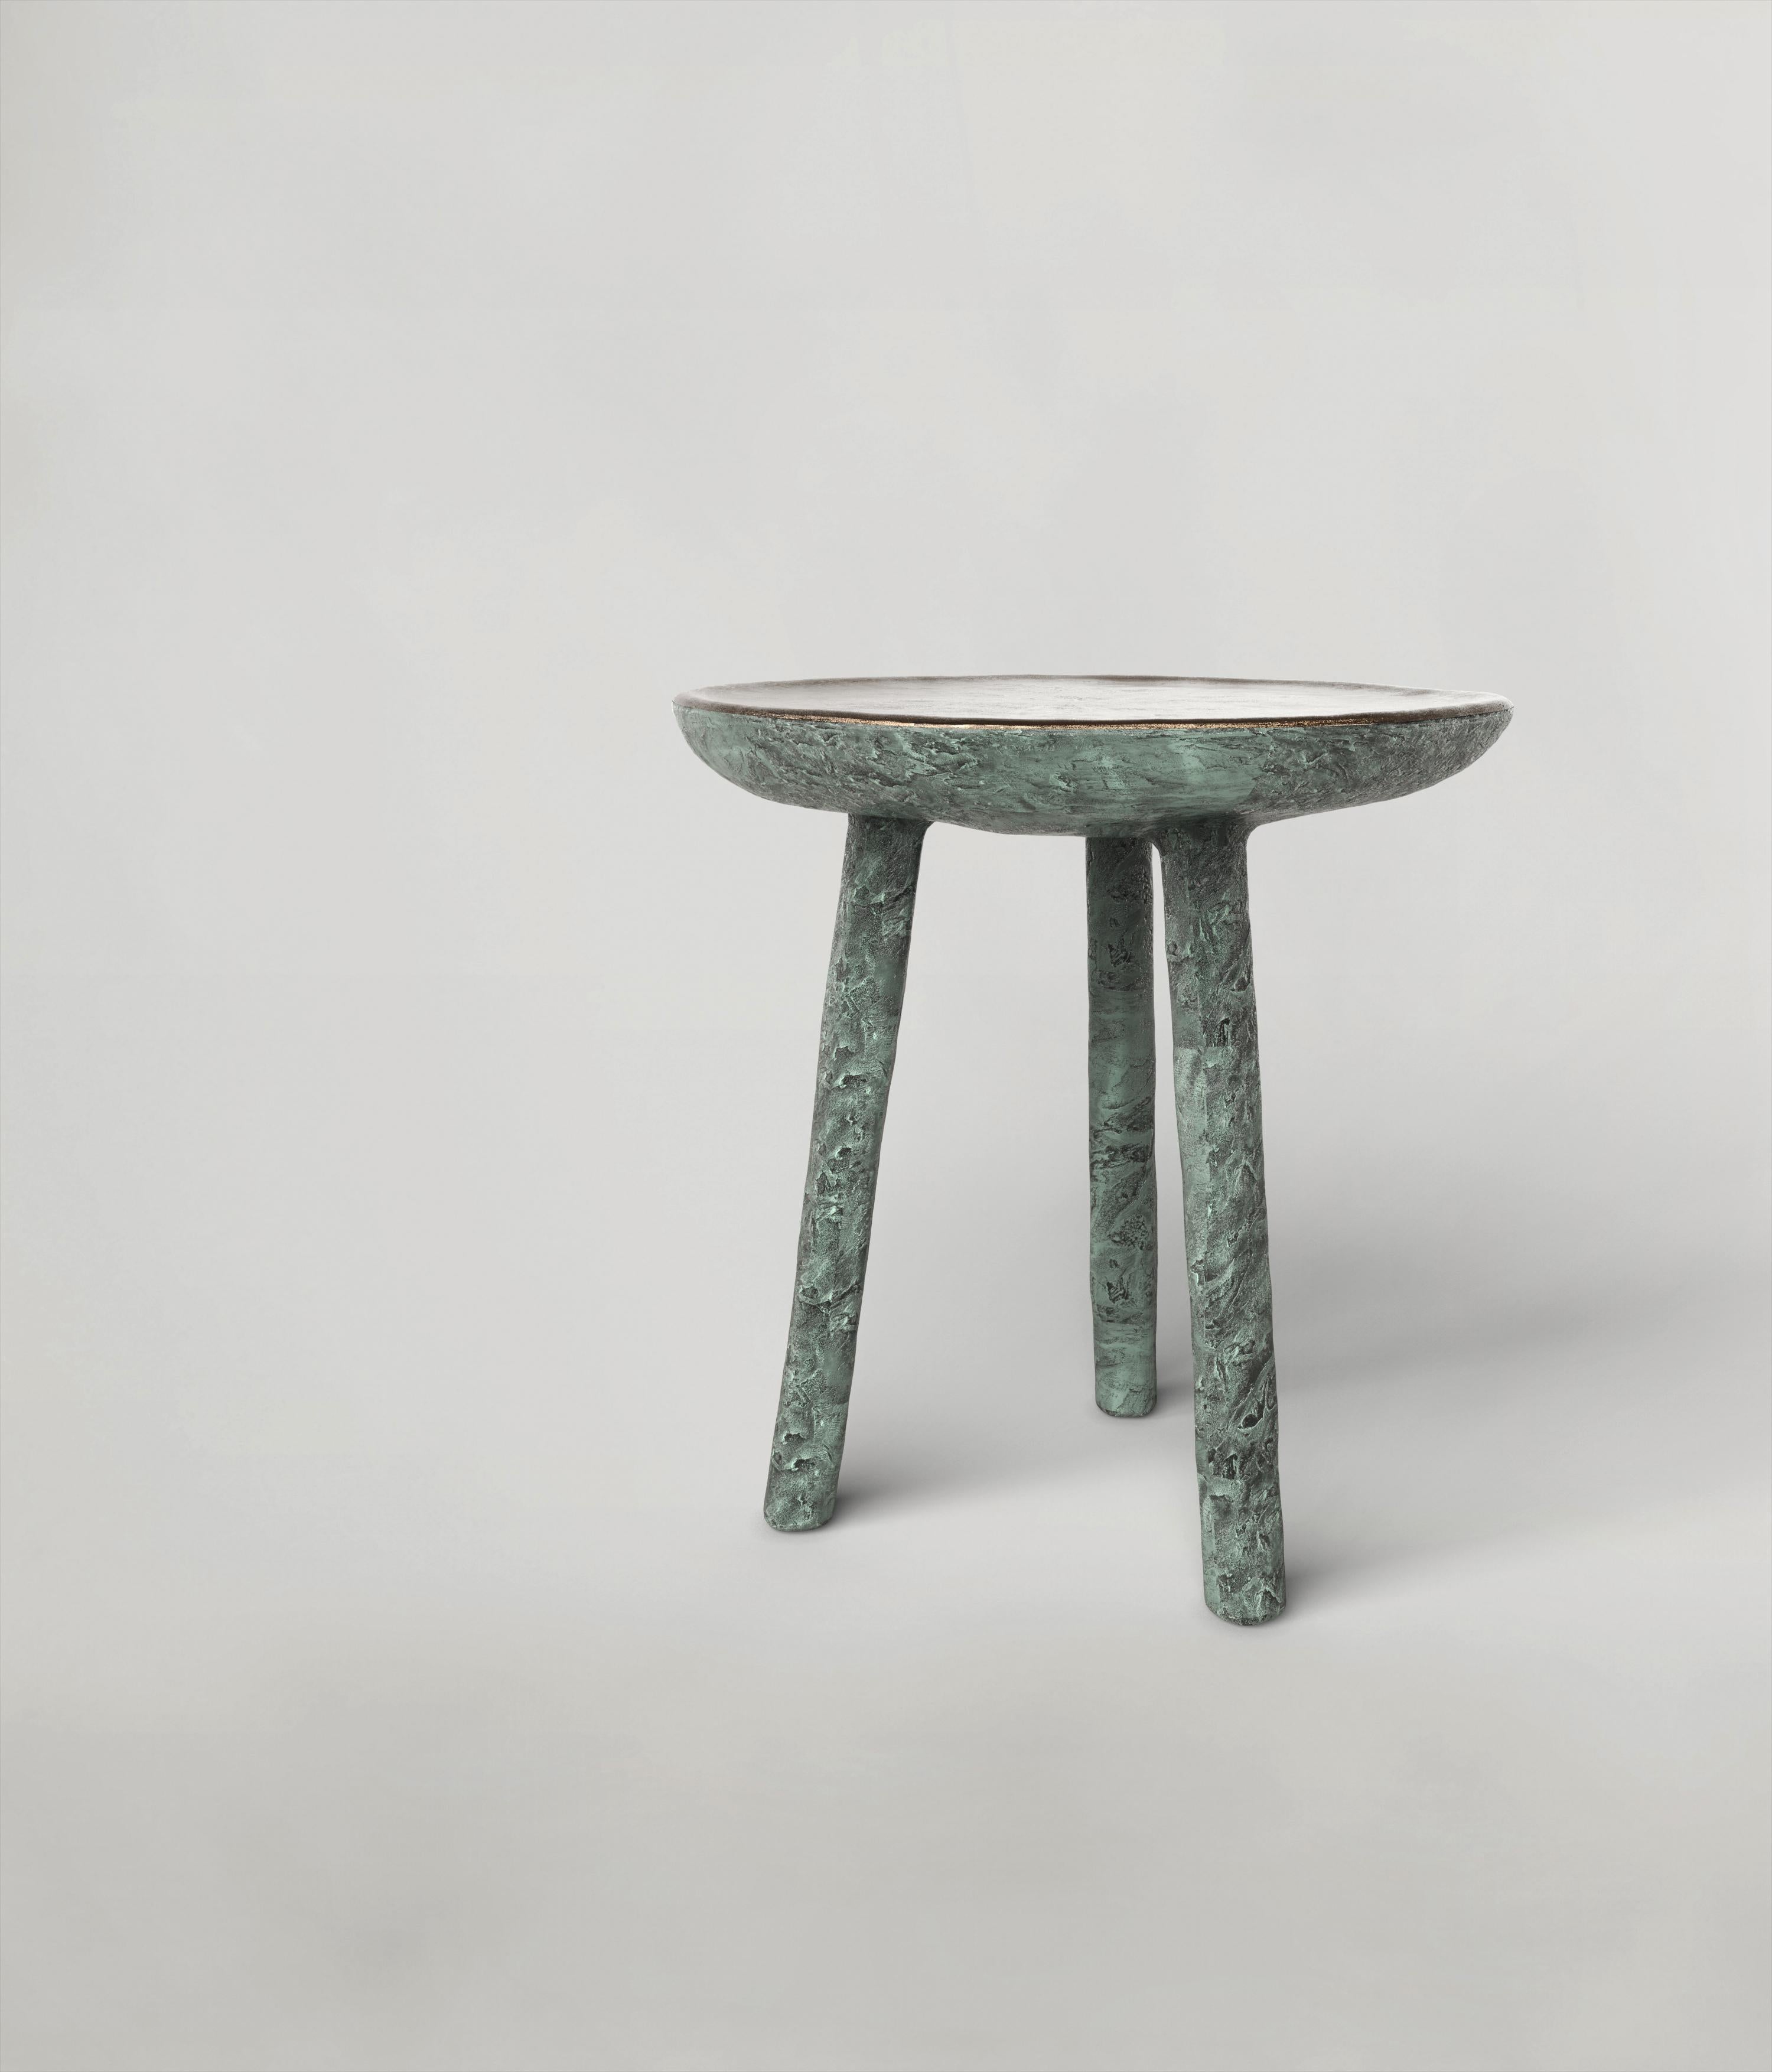 Comma V1 stool by Edizione Limitata
Limited edition of 150 pieces. Signed and numbered.
Dimensions: D 34 x W 34 x H 38 cm
Materials: green patina bronze

Comma is a 21st century collection of seatings made by Italian artisans in bronze with a